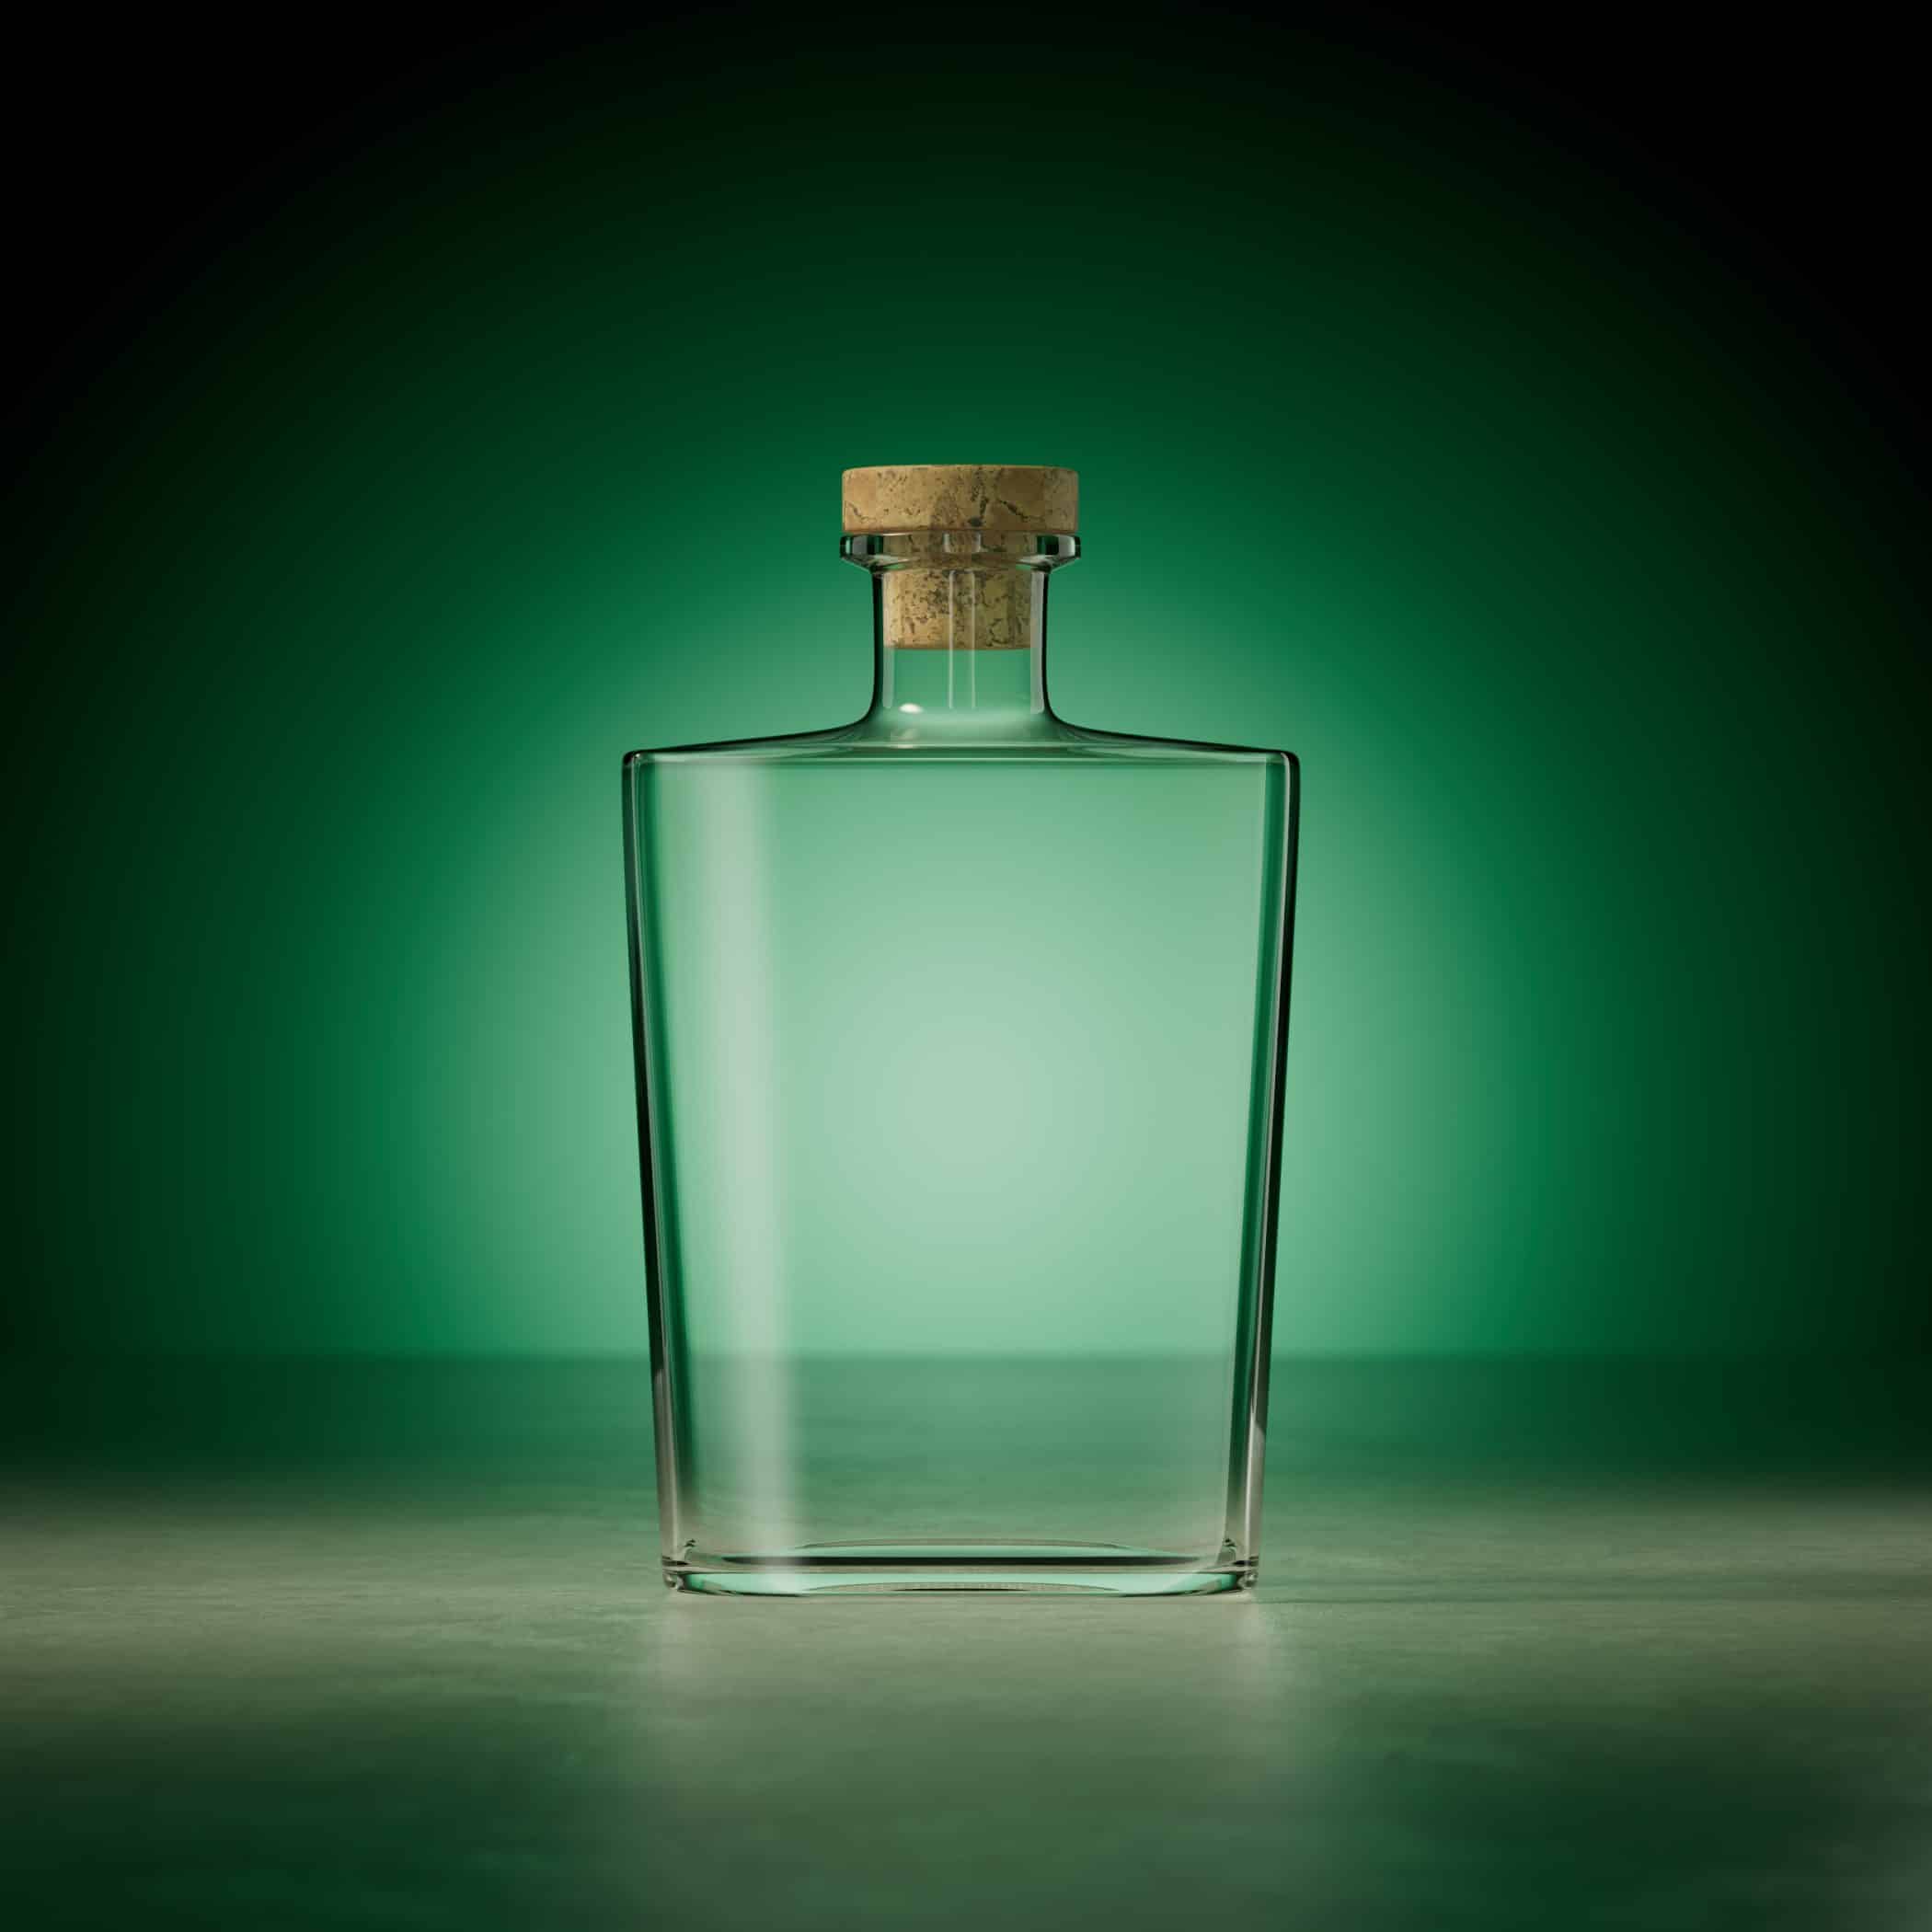 A clear, square glass bottle with cork bartop sealing it. Sat in front of a green background. lit by a spotlight.